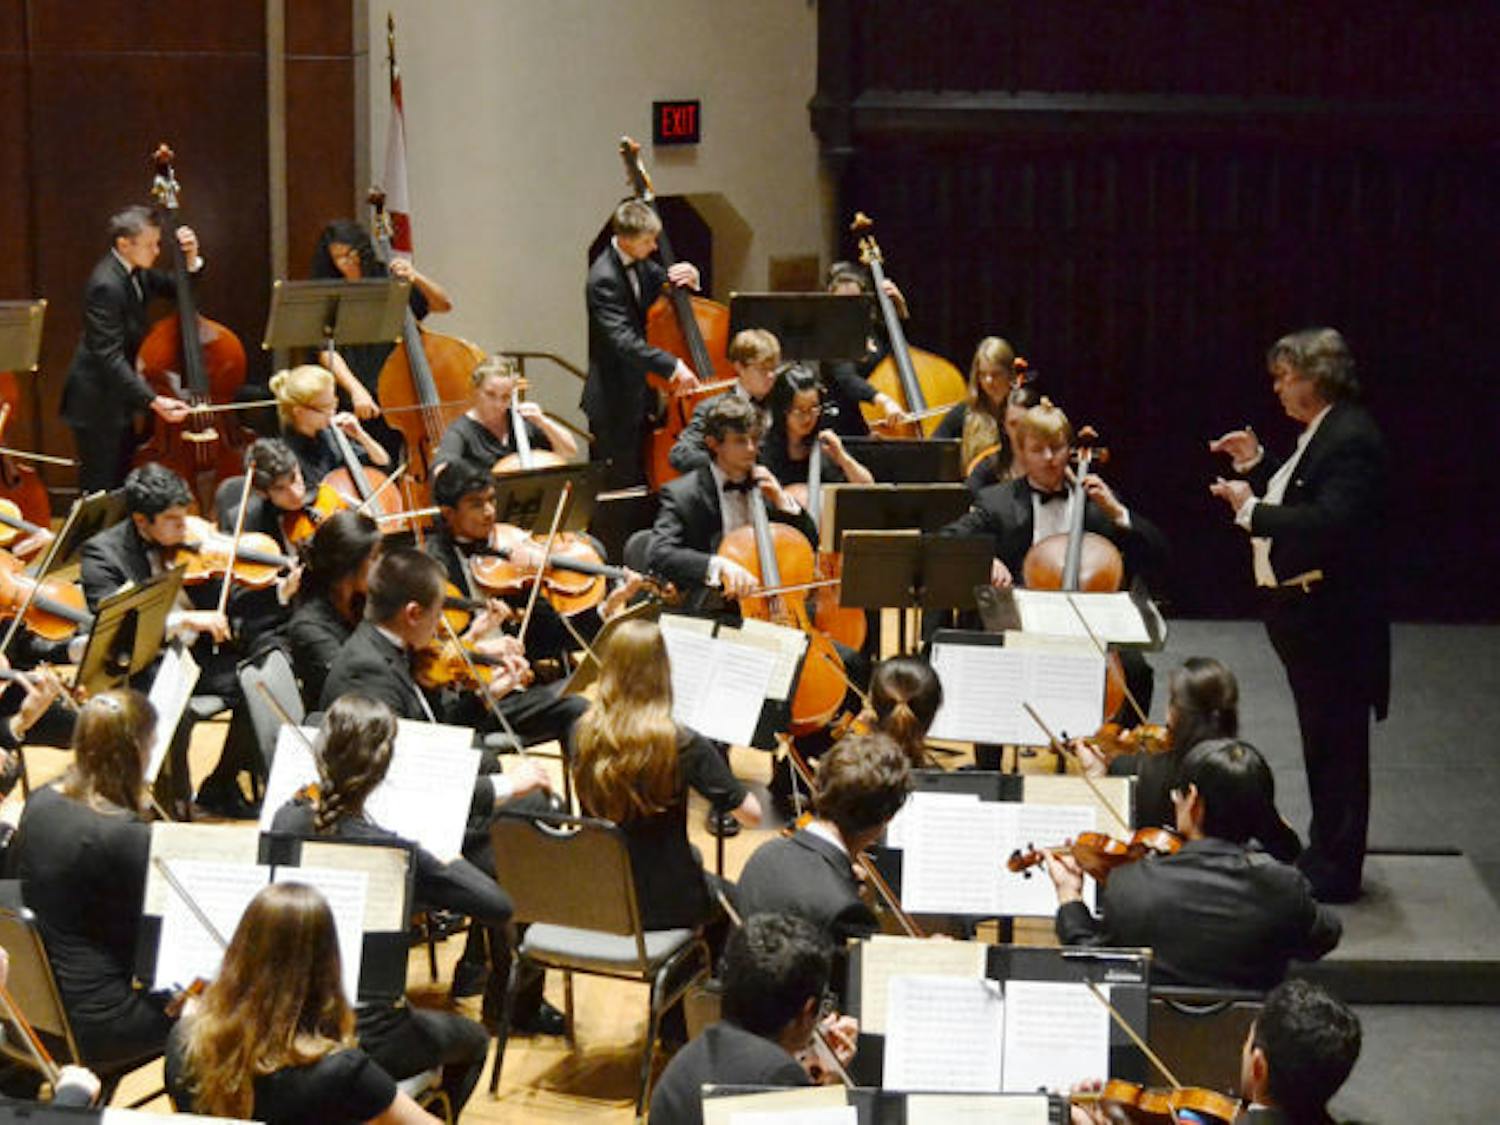 Raymond Chobaz conducts the UF Symphony Orchestra during a movement on Thursday in the University Auditorium. The performance featured works of Franz Beck, Ludwig van Beethoven and Johannes Brahms.